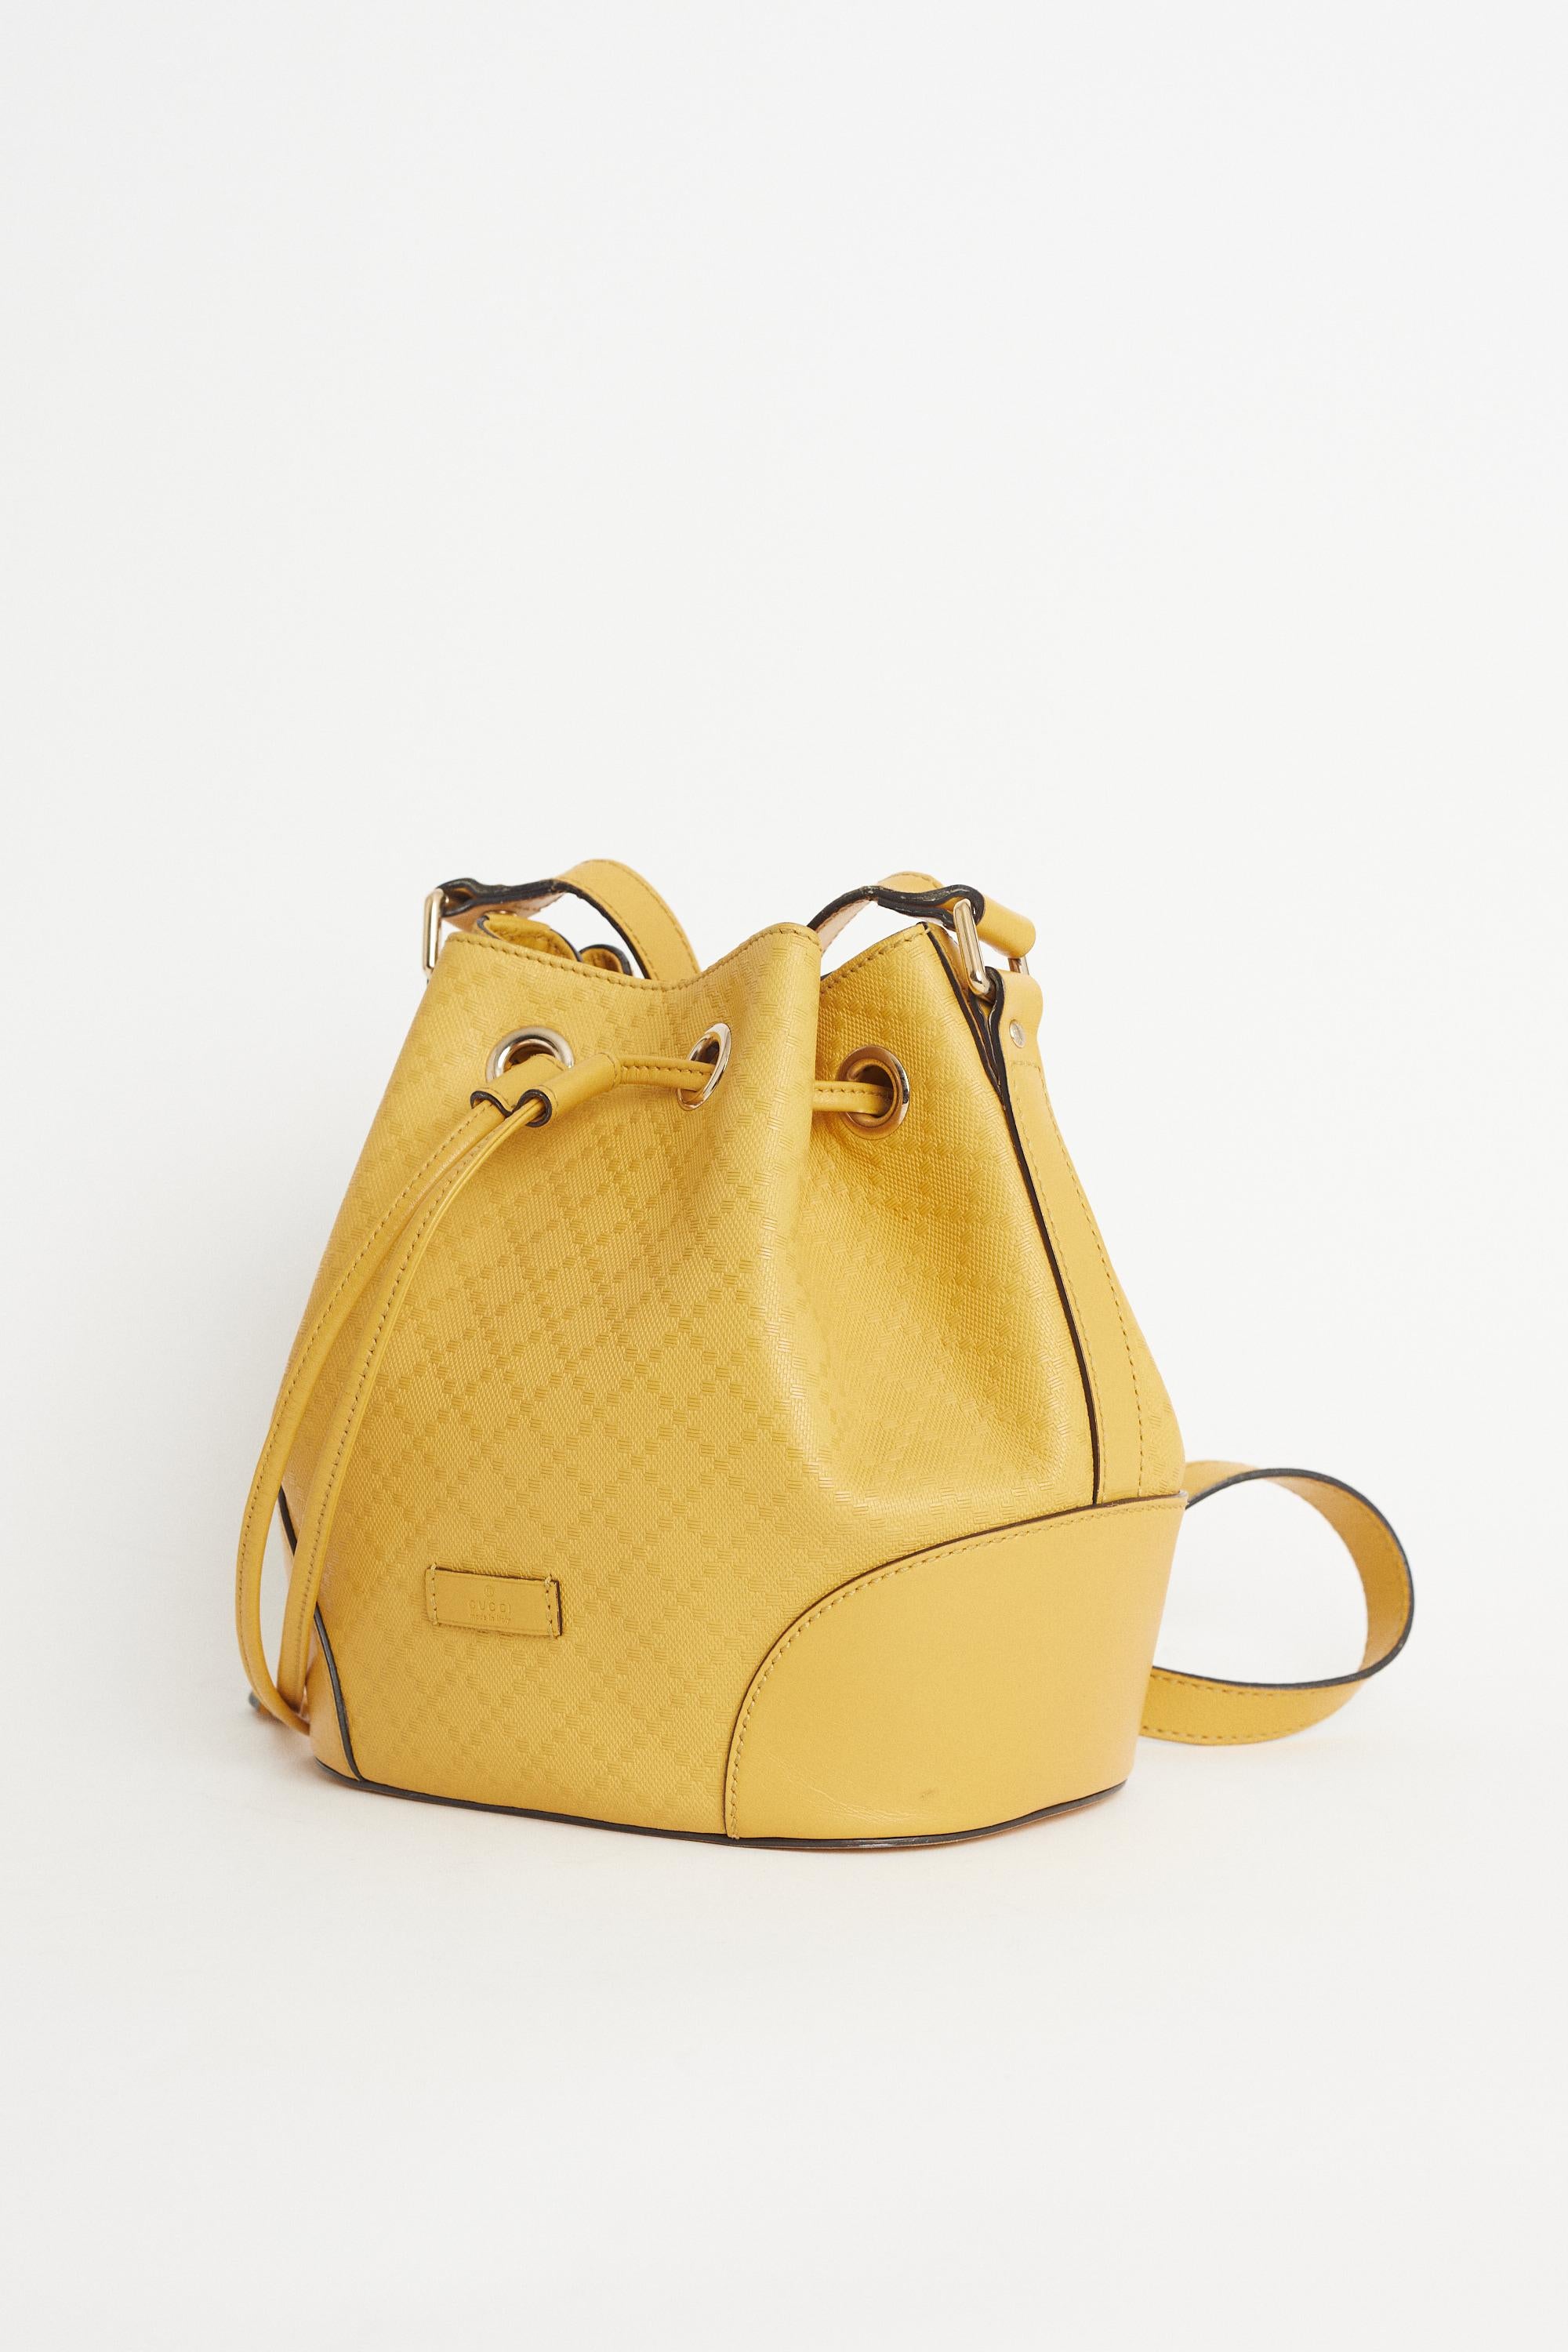 We are very excited to present this Vintage 2000’s Gucci yellow diamante embossed bucket bag. Features an adjustable flat leather shoulder strap, open top with drawstring closure,  interior zip and slip pockets. Pre-loved, in excellent vintage